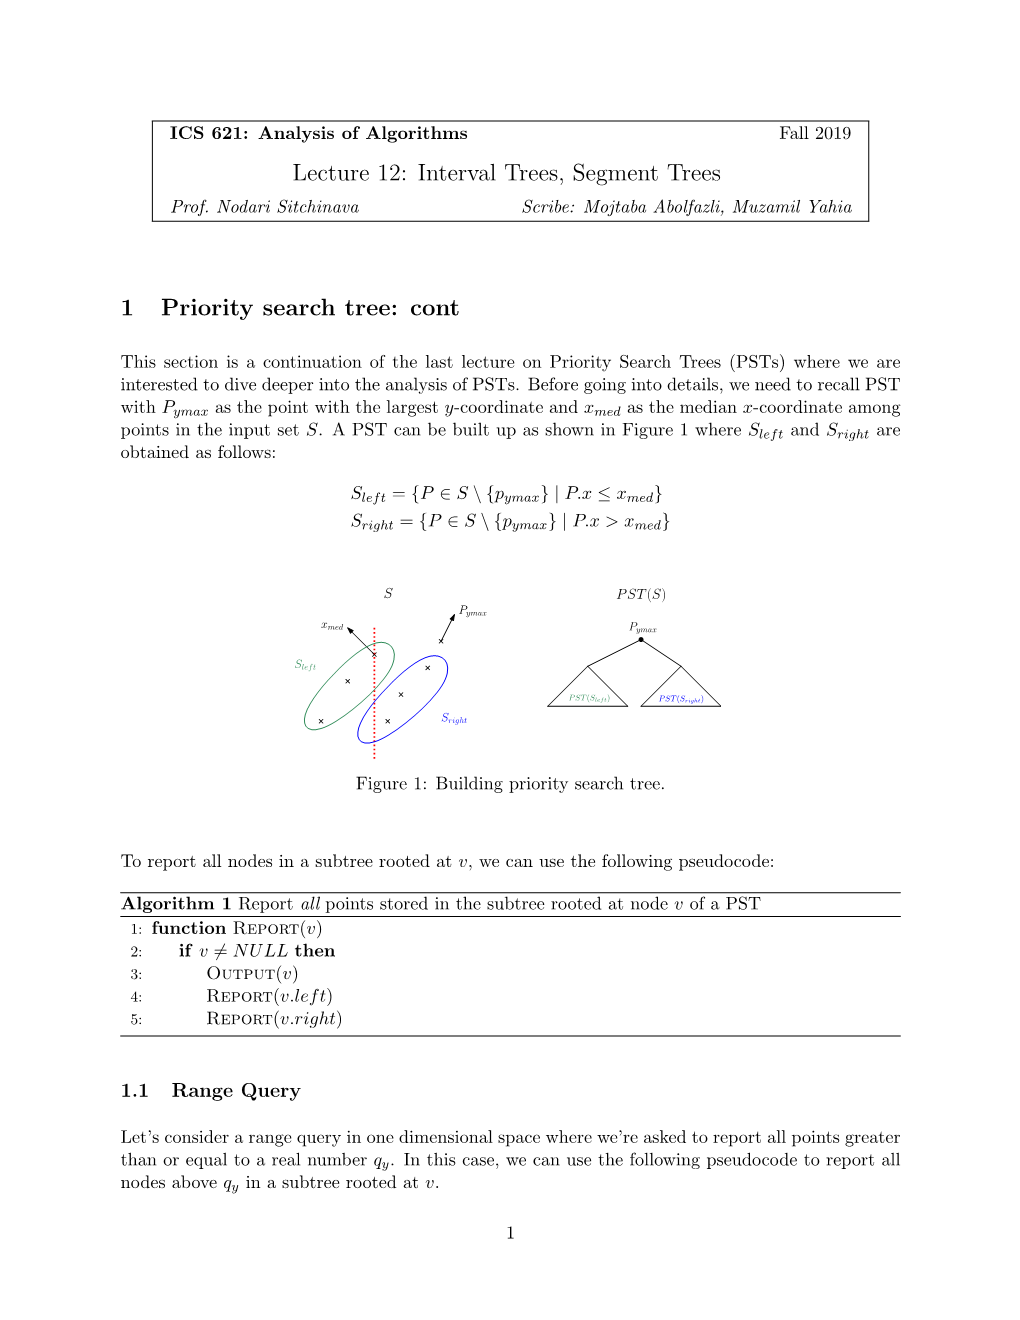 Lecture 12: Interval Trees, Segment Trees 1 Priority Search Tree: Cont